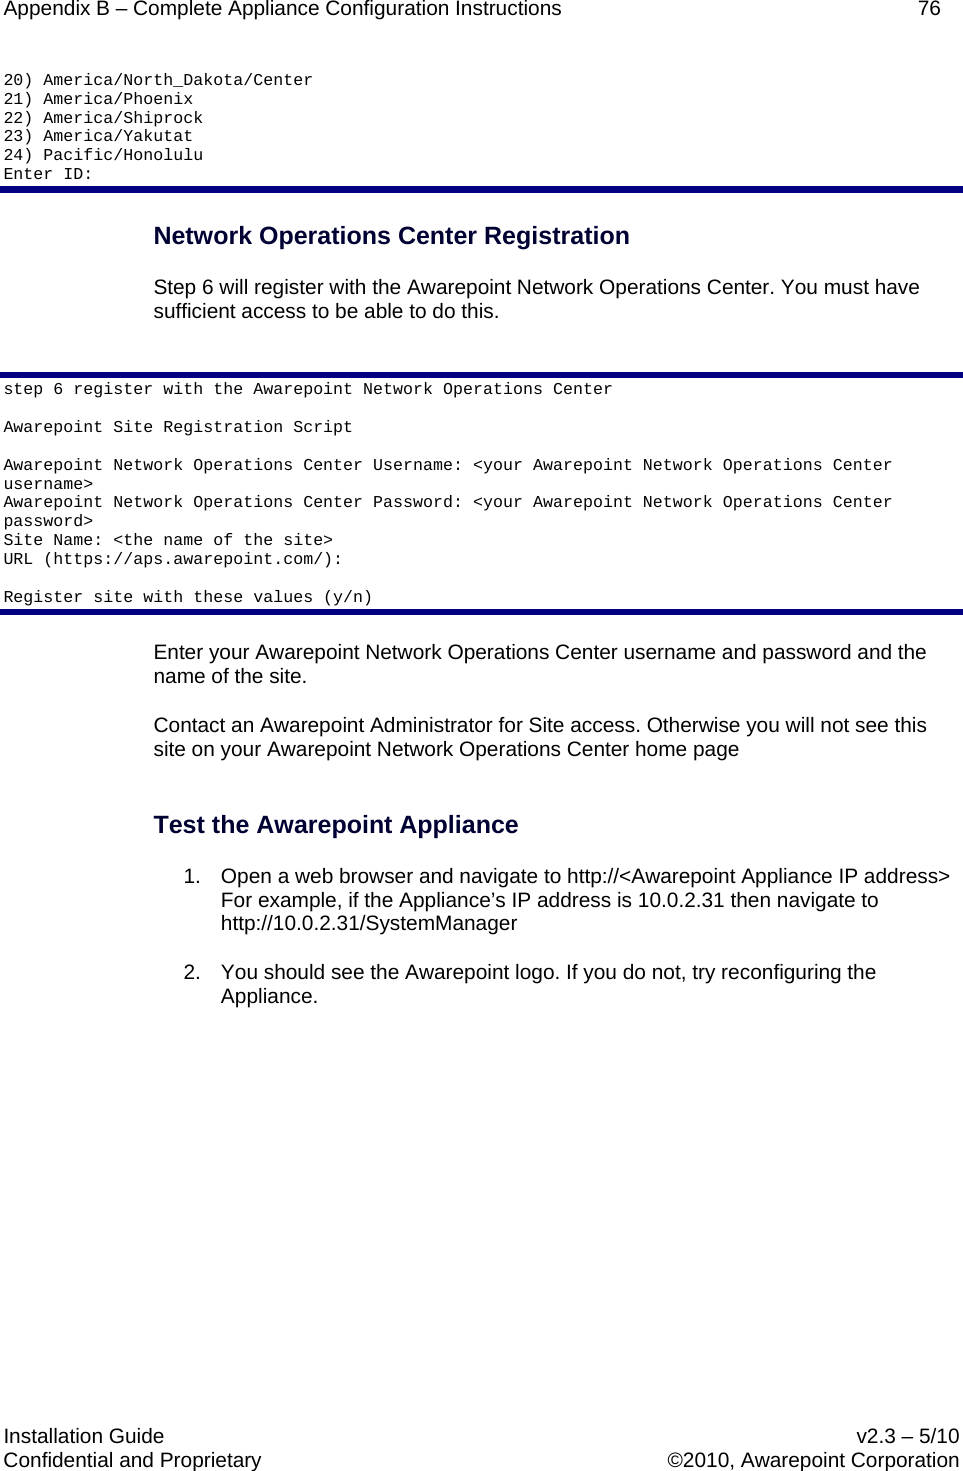 Appendix B – Complete Appliance Configuration Instructions    76  Installation Guide    v2.3 – 5/10 Confidential and Proprietary    ©2010, Awarepoint Corporation  20) America/North_Dakota/Center 21) America/Phoenix 22) America/Shiprock 23) America/Yakutat 24) Pacific/Honolulu Enter ID:  Network Operations Center Registration Step 6 will register with the Awarepoint Network Operations Center. You must have sufficient access to be able to do this.  step 6 register with the Awarepoint Network Operations Center  Awarepoint Site Registration Script  Awarepoint Network Operations Center Username: &lt;your Awarepoint Network Operations Center username&gt; Awarepoint Network Operations Center Password: &lt;your Awarepoint Network Operations Center password&gt; Site Name: &lt;the name of the site&gt; URL (https://aps.awarepoint.com/):   Register site with these values (y/n) Enter your Awarepoint Network Operations Center username and password and the name of the site. Contact an Awarepoint Administrator for Site access. Otherwise you will not see this site on your Awarepoint Network Operations Center home page  Test the Awarepoint Appliance 1. Open a web browser and navigate to http://&lt;Awarepoint Appliance IP address&gt;  For example, if the Appliance’s IP address is 10.0.2.31 then navigate to http://10.0.2.31/SystemManager 2. You should see the Awarepoint logo. If you do not, try reconfiguring the Appliance.         